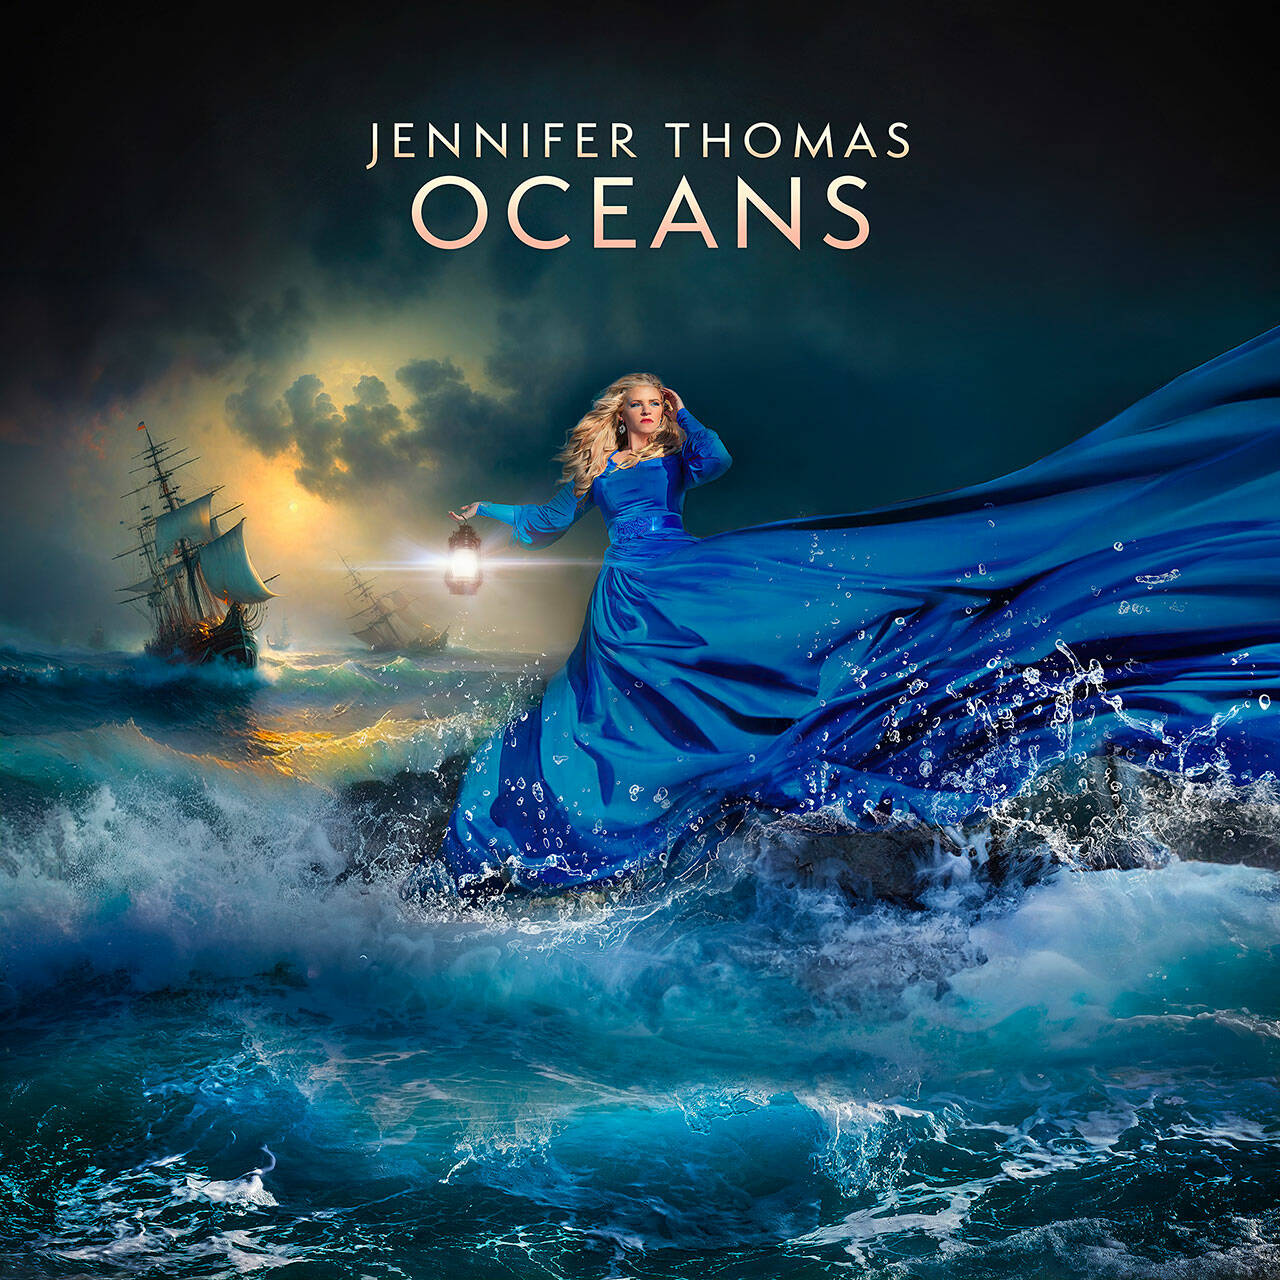 Photo by Marina Shipova, art design Jennifer Thomas/ Sequim composer Jennifer Thomas releases her newest album “Oceans” on June 7 through digital retailers and streaming sites, along with digital and physical copies available at her website <a href="https://jenniferthomasmusic.com" target="_blank">jenniferthomasmusic.com</a>.